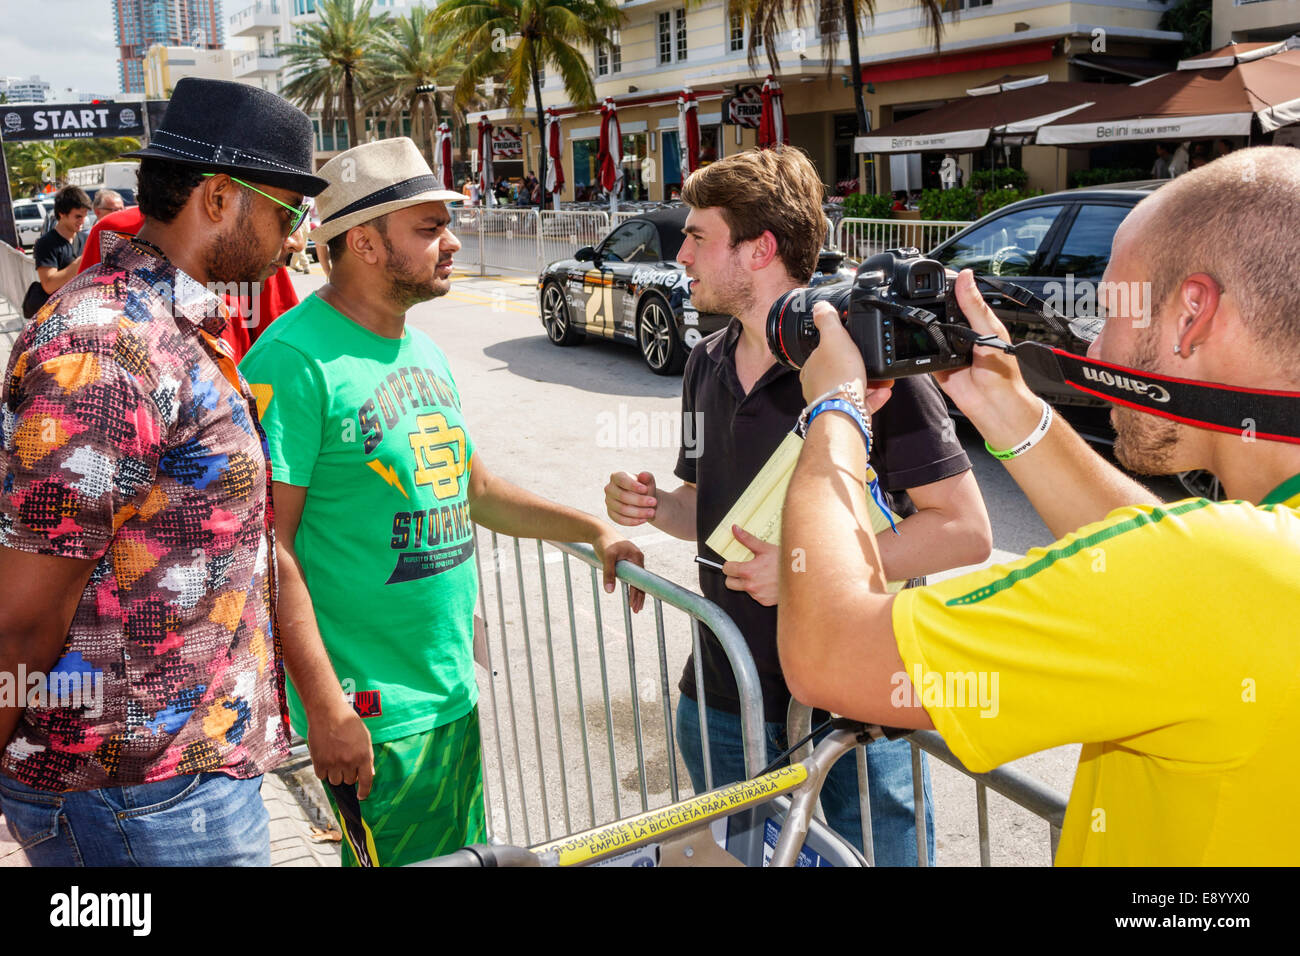 Miami Beach Florida,Ocean Drive,Gumball 3000 Road race Motor Rally,voitures de sport,course,exposition collection homme hommes,pilotes,interview,jou Banque D'Images